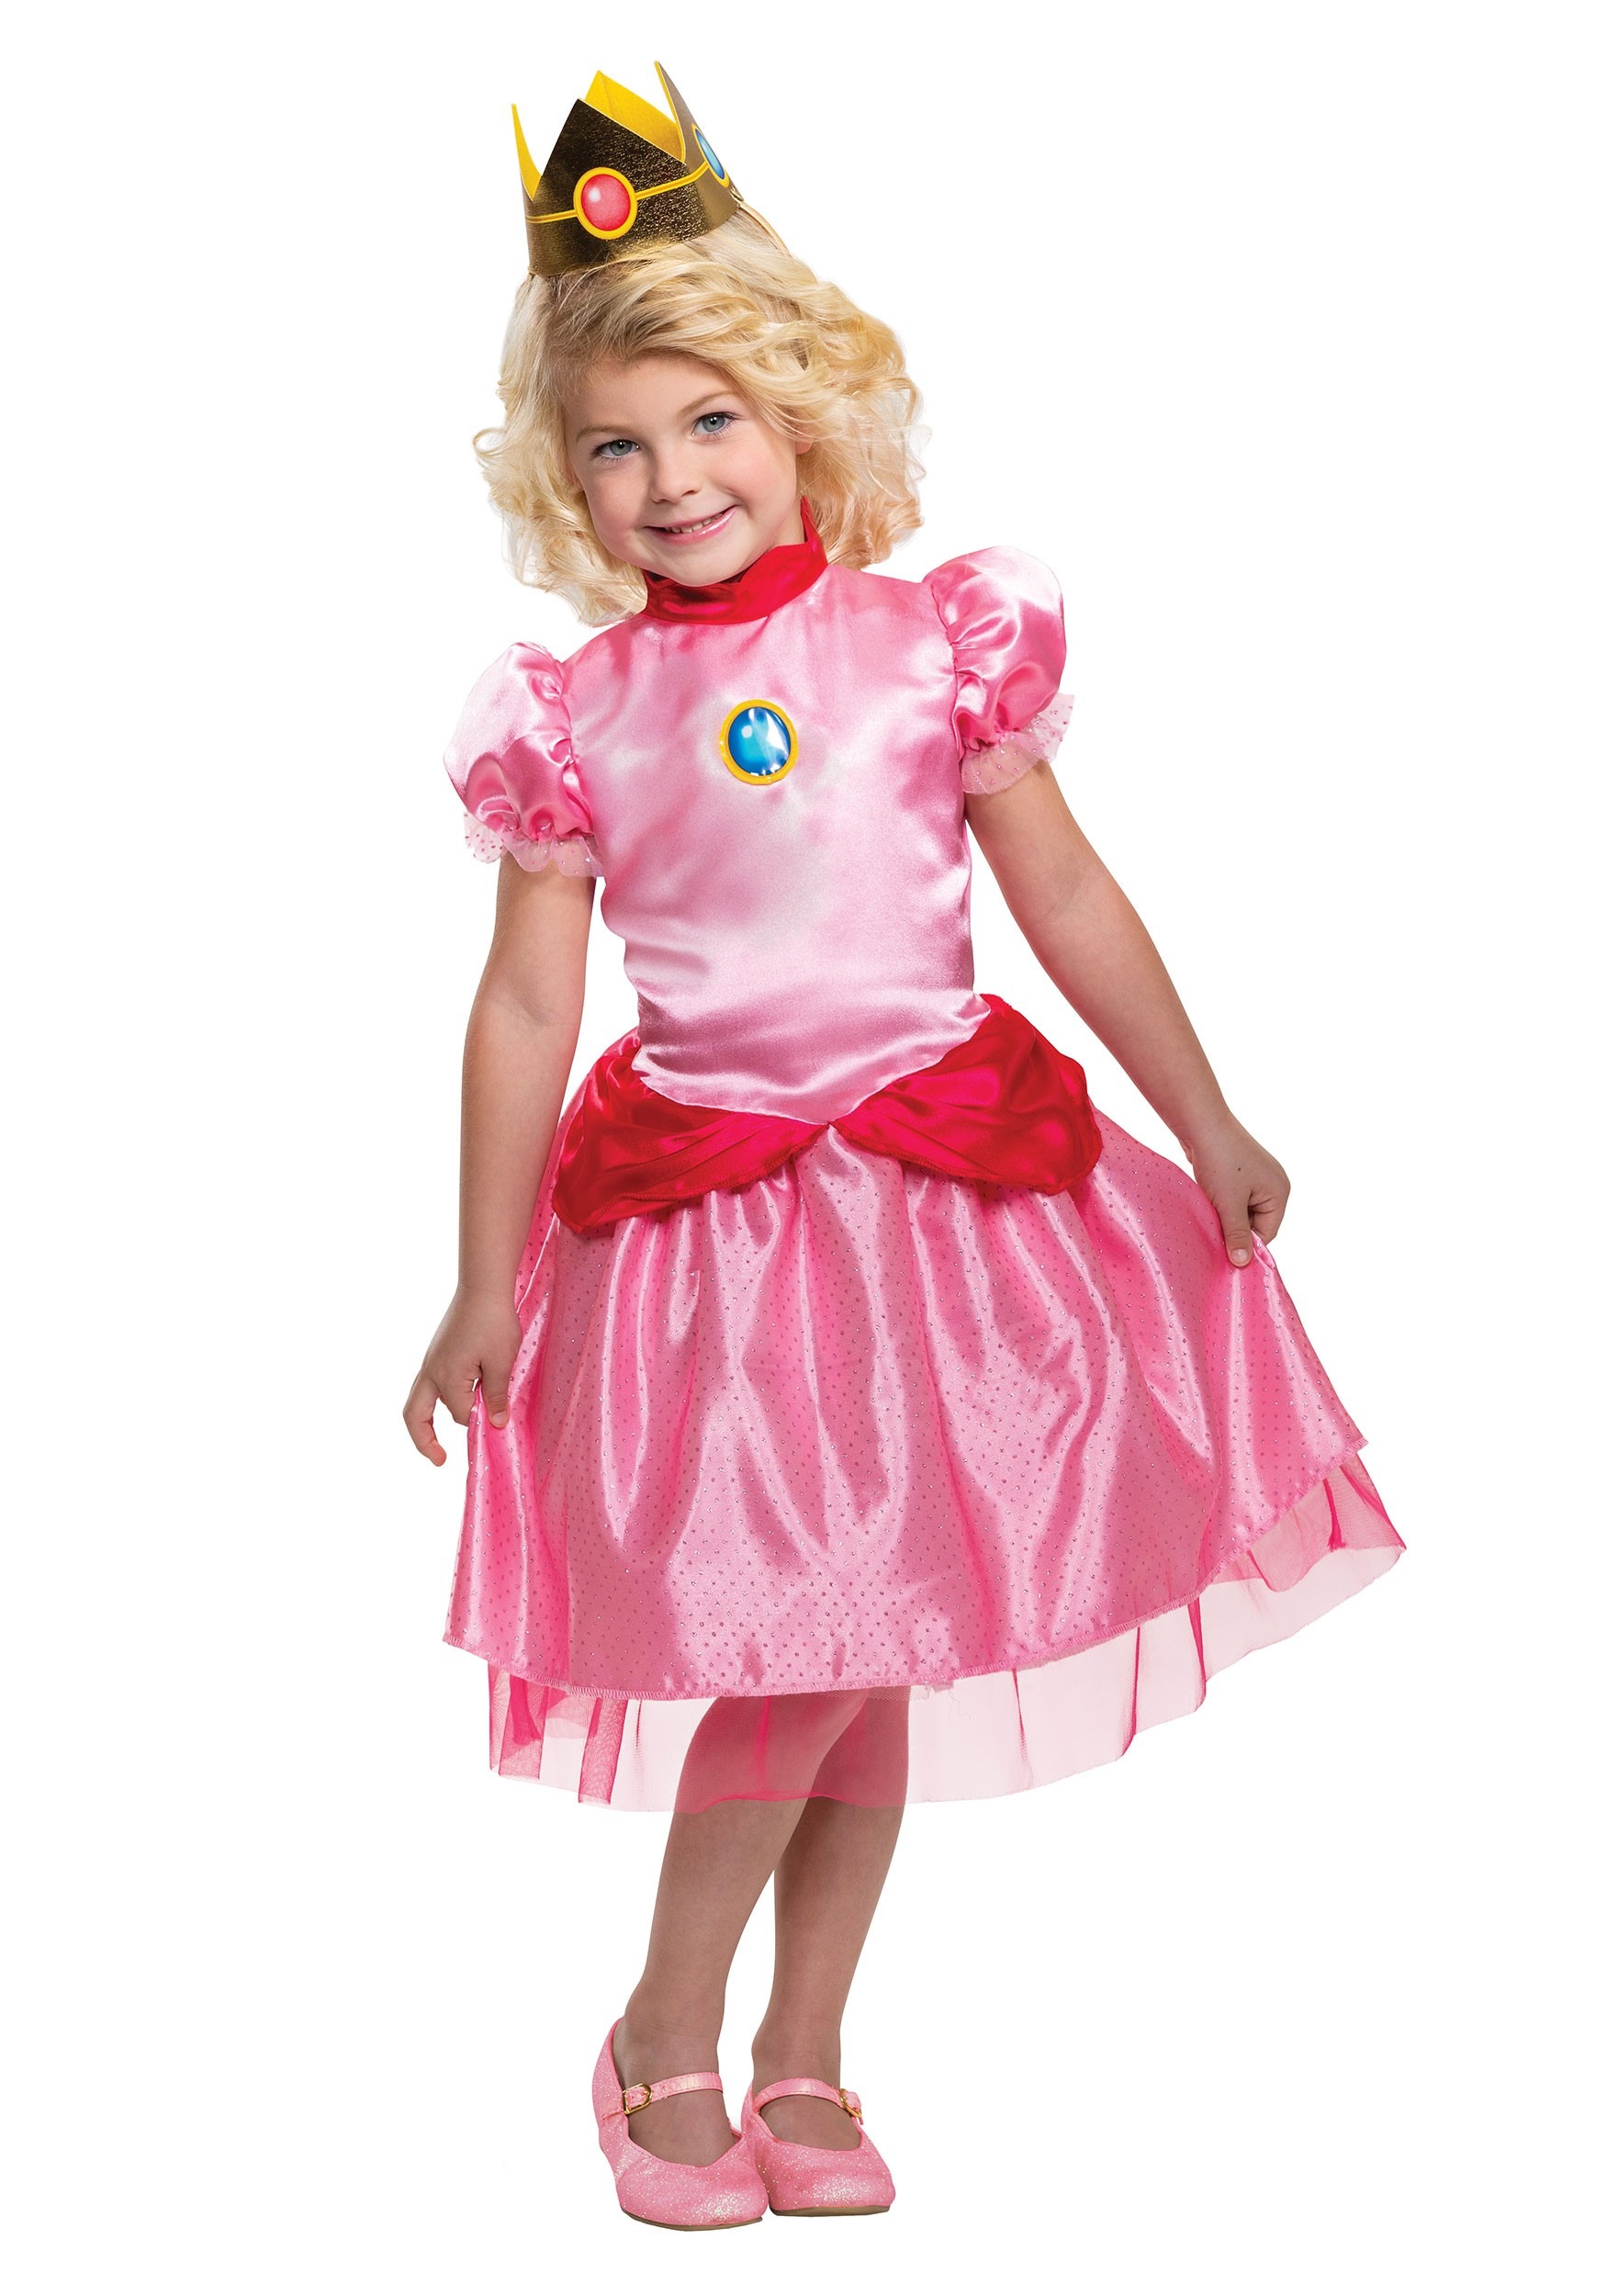 Photos - Fancy Dress MARIO Disguise Super  Toddler Classic Princess Peach For Toddlers Pink DI10 